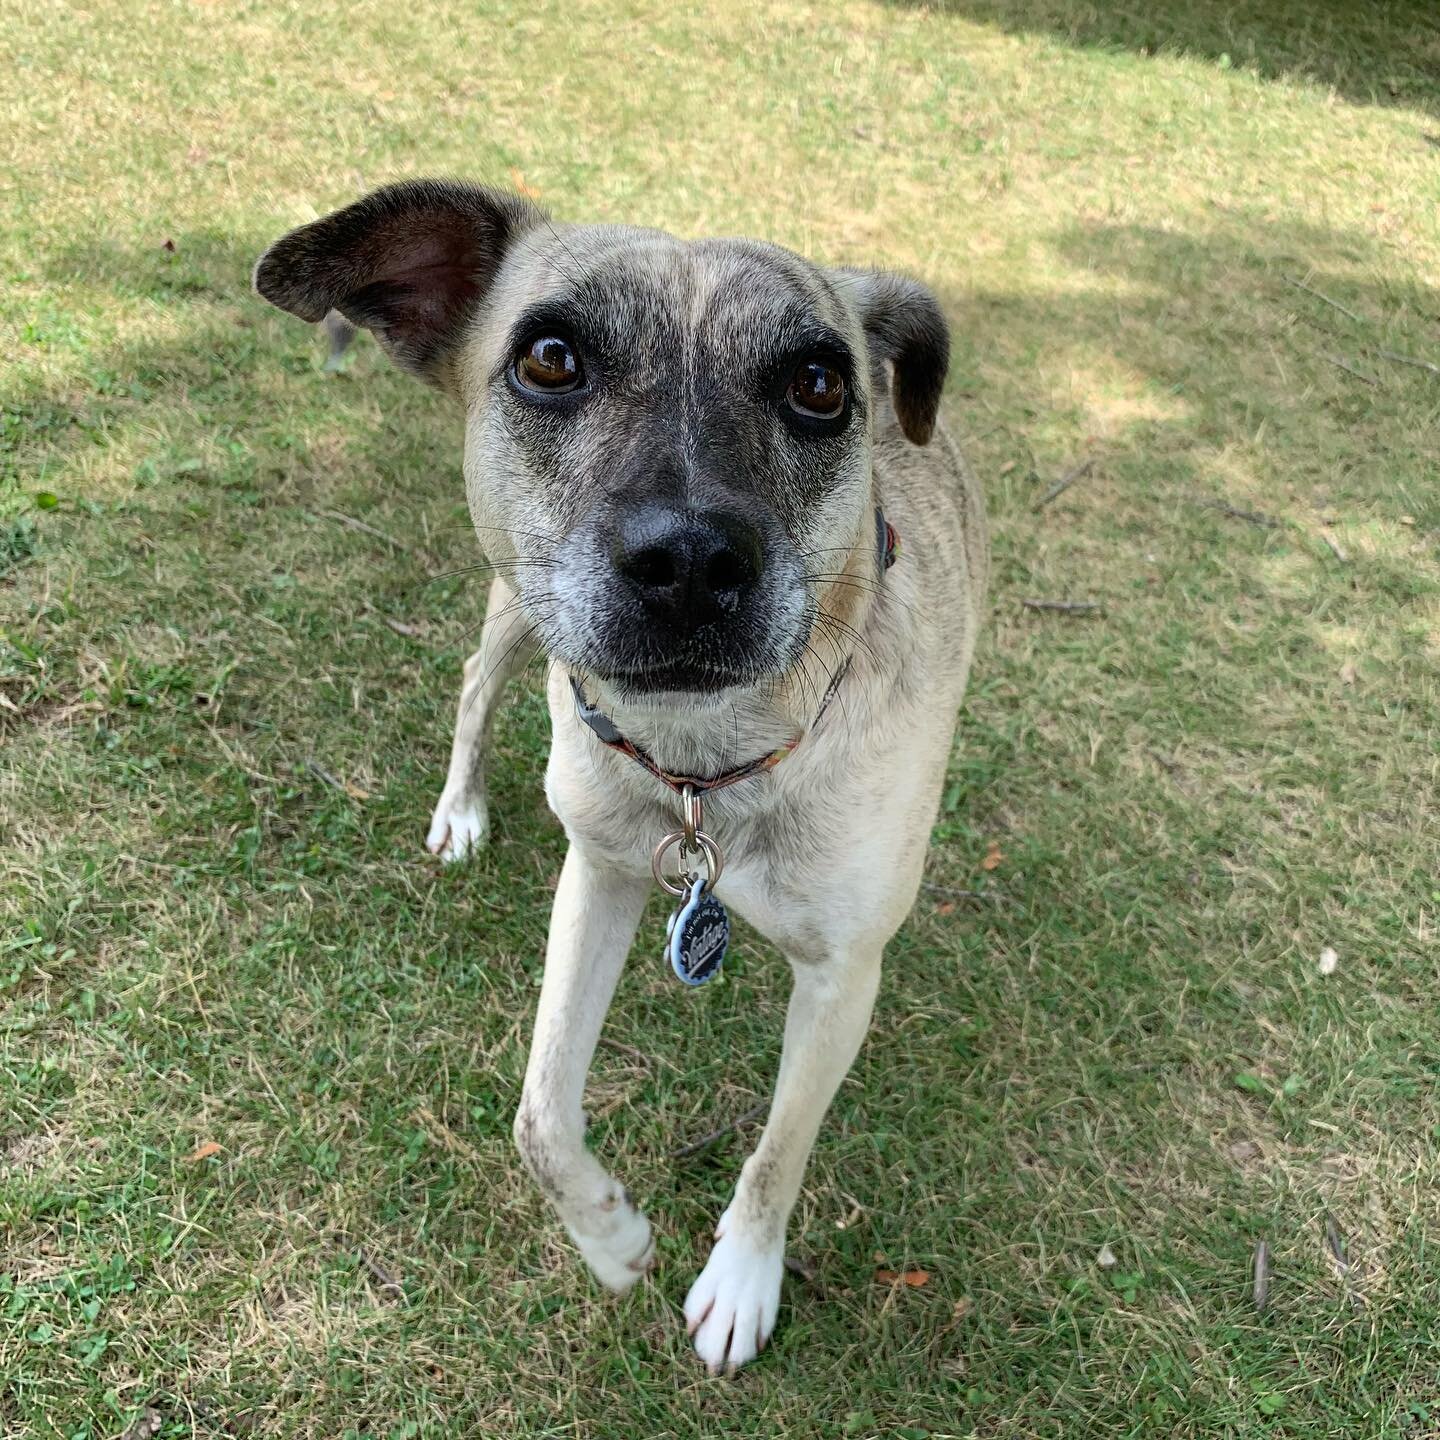 Chichi: &ldquo;what&rsquo;s that you say?!? It&rsquo;s Friday?!?&rdquo;
#thepack #tgif #rescuedog #happydog #friday #dogwalking #summervibes #weekend